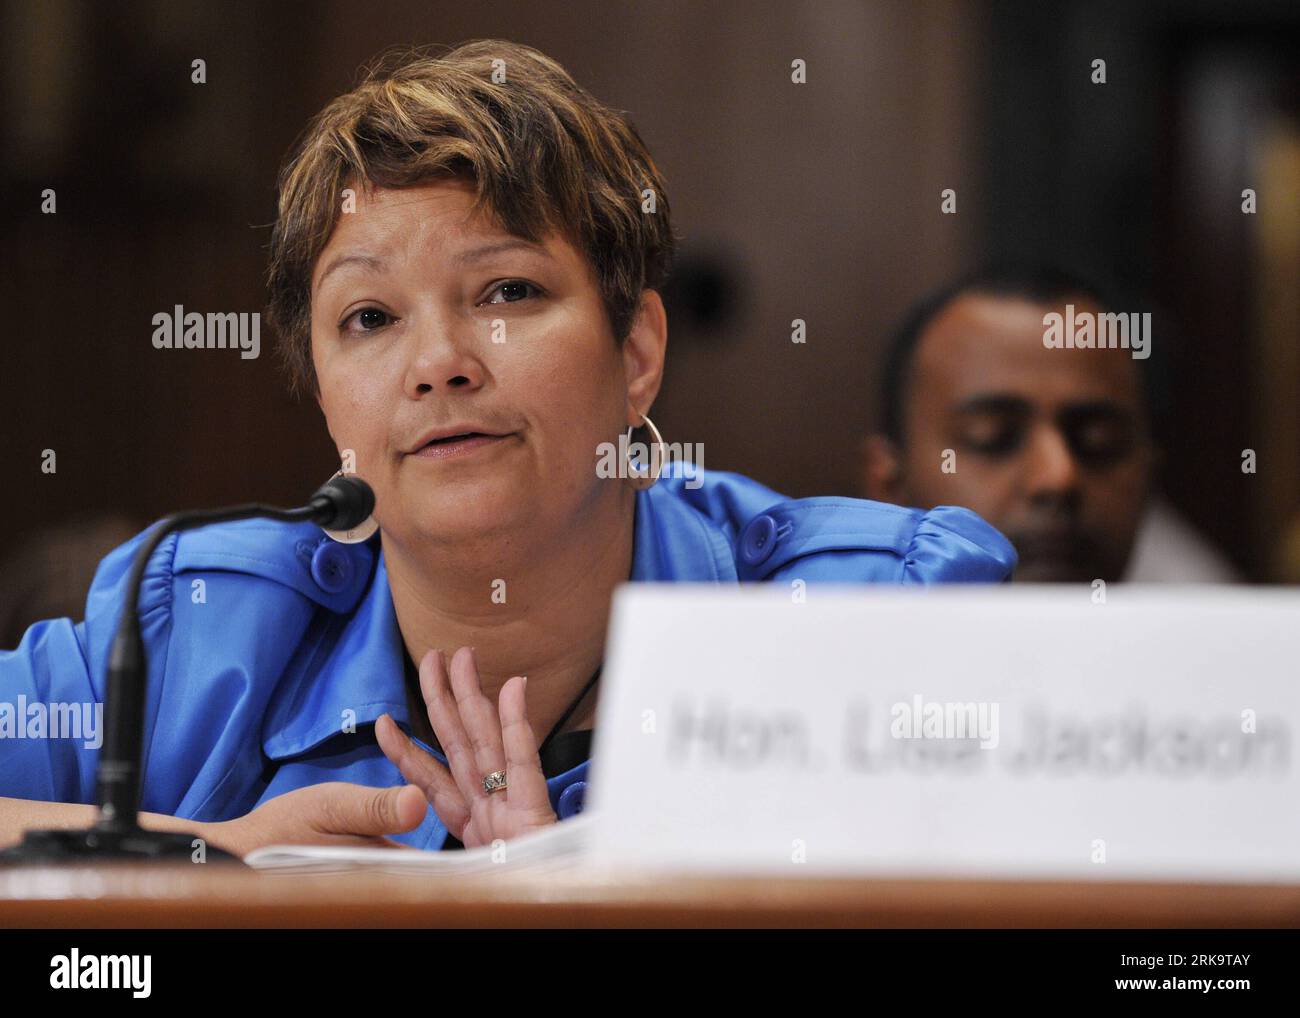 Bildnummer: 54230788  Datum: 15.07.2010  Copyright: imago/Xinhua (100715) -- WASHINGTON, July 15, 2010 (Xinhua) -- Lisa Jackson, administrator of U.S. Environmental Protection Agency (EPA), testifies before the U.S. Senate Commerce, Justice, Science and Related Agencies Subcommittee during a hearing to review the use of dispersants in response to the Deepwater Horizon oil spill on Capitol Hill in Washington D.C., capital of the United States, July 15, 2010. (Xinhua/Zhang Jun) (zw) (2)U.S.-WASHINGTON-OIL SPILL-EPA-DISPERSANTS-HEARING PUBLICATIONxNOTxINxCHN People Gesellschaft kbdig xsk 2010 que Stock Photo